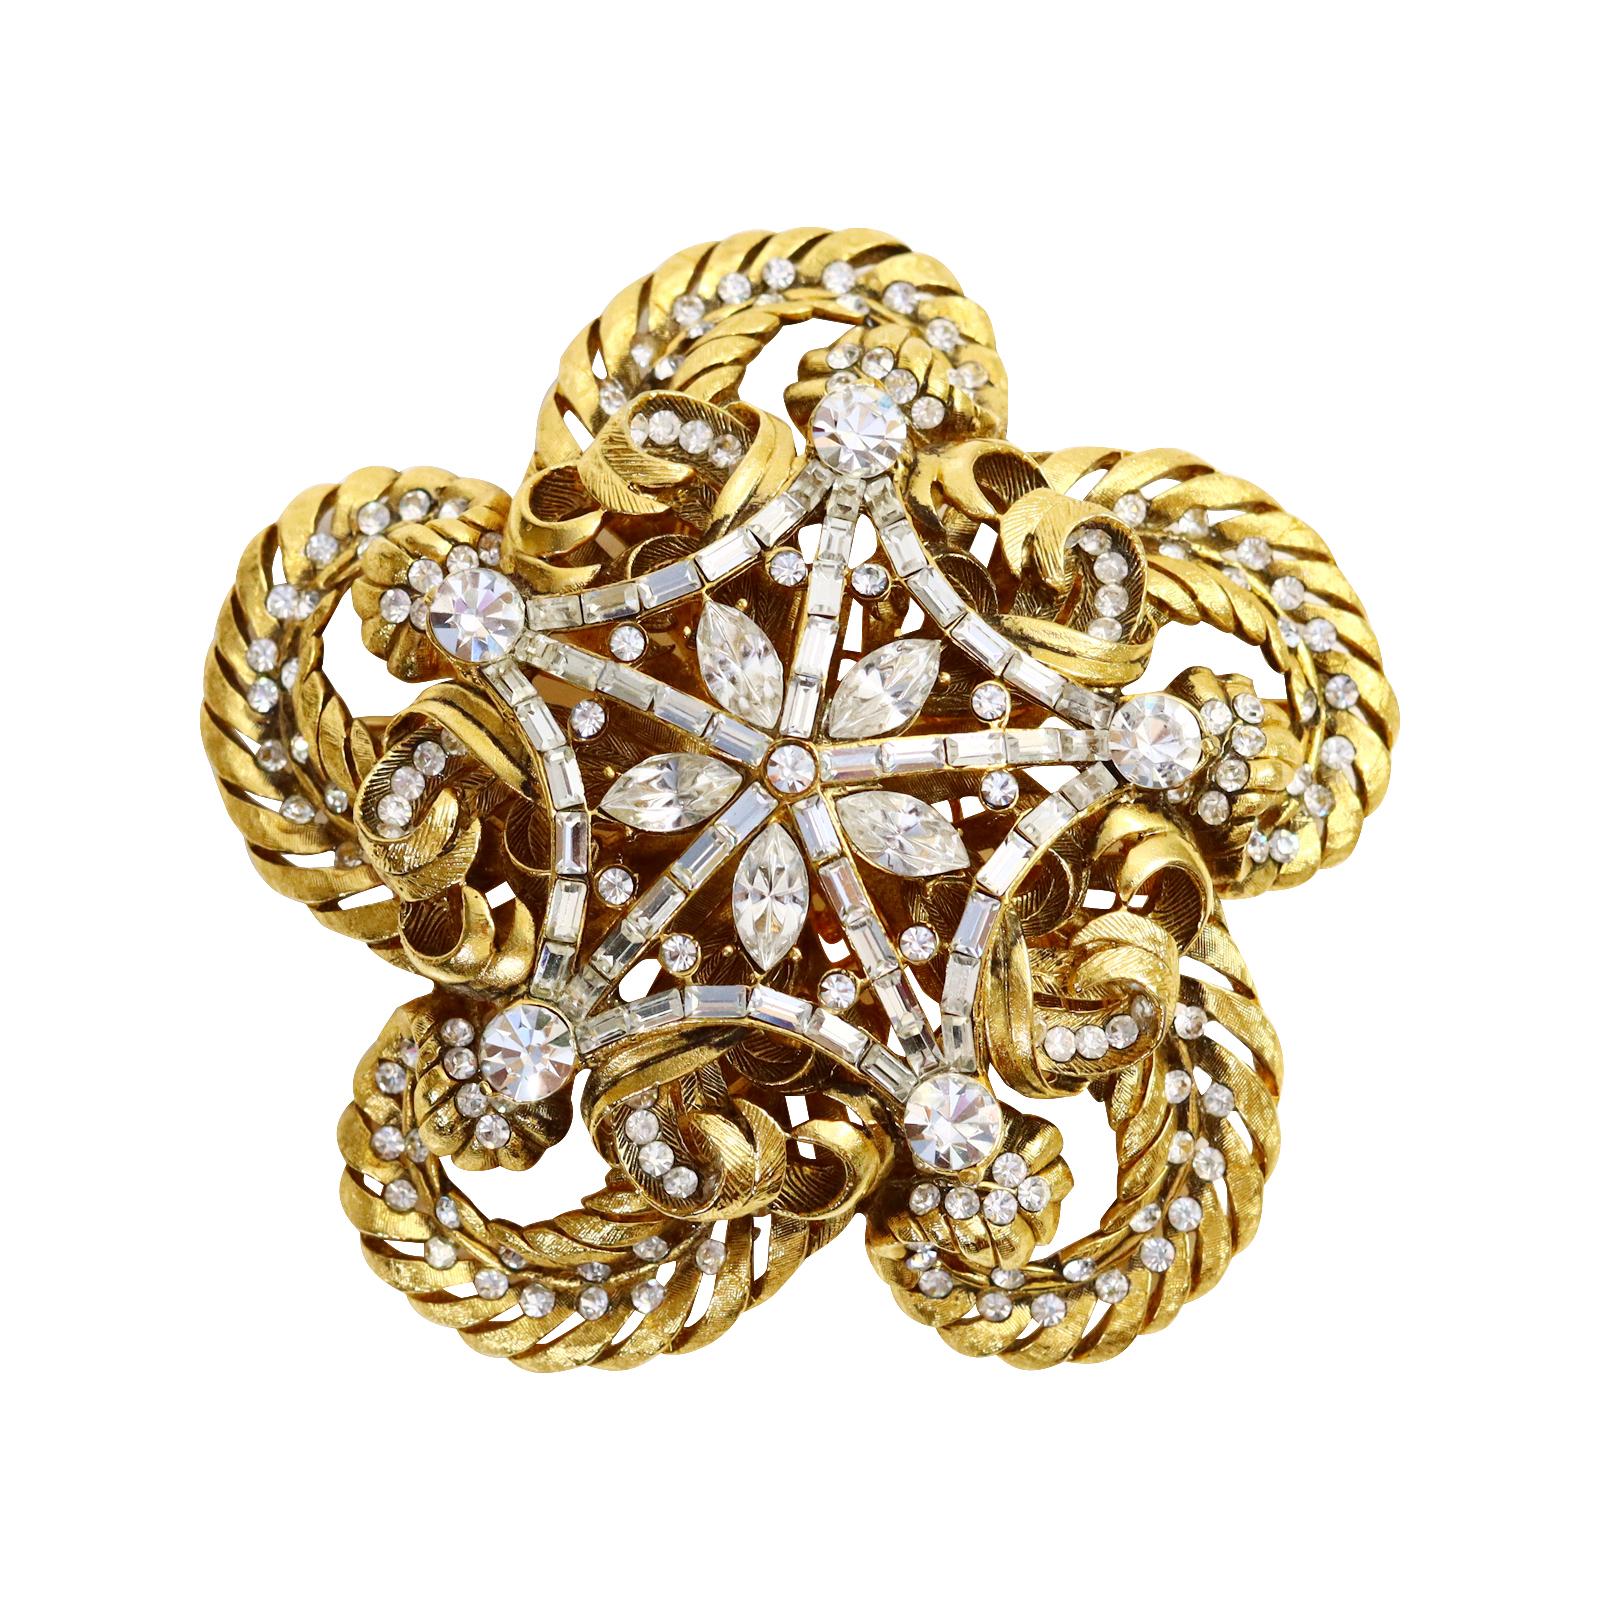 Vintage Gold and Crystal Domed Large Brooch Circa 1980s.  Intricate Gold design work shows baguettes and oval stones sitting on top in a star like pattern. Looks great as a brooch but also on a silk cord or a thick gold link chain or a black lariat.